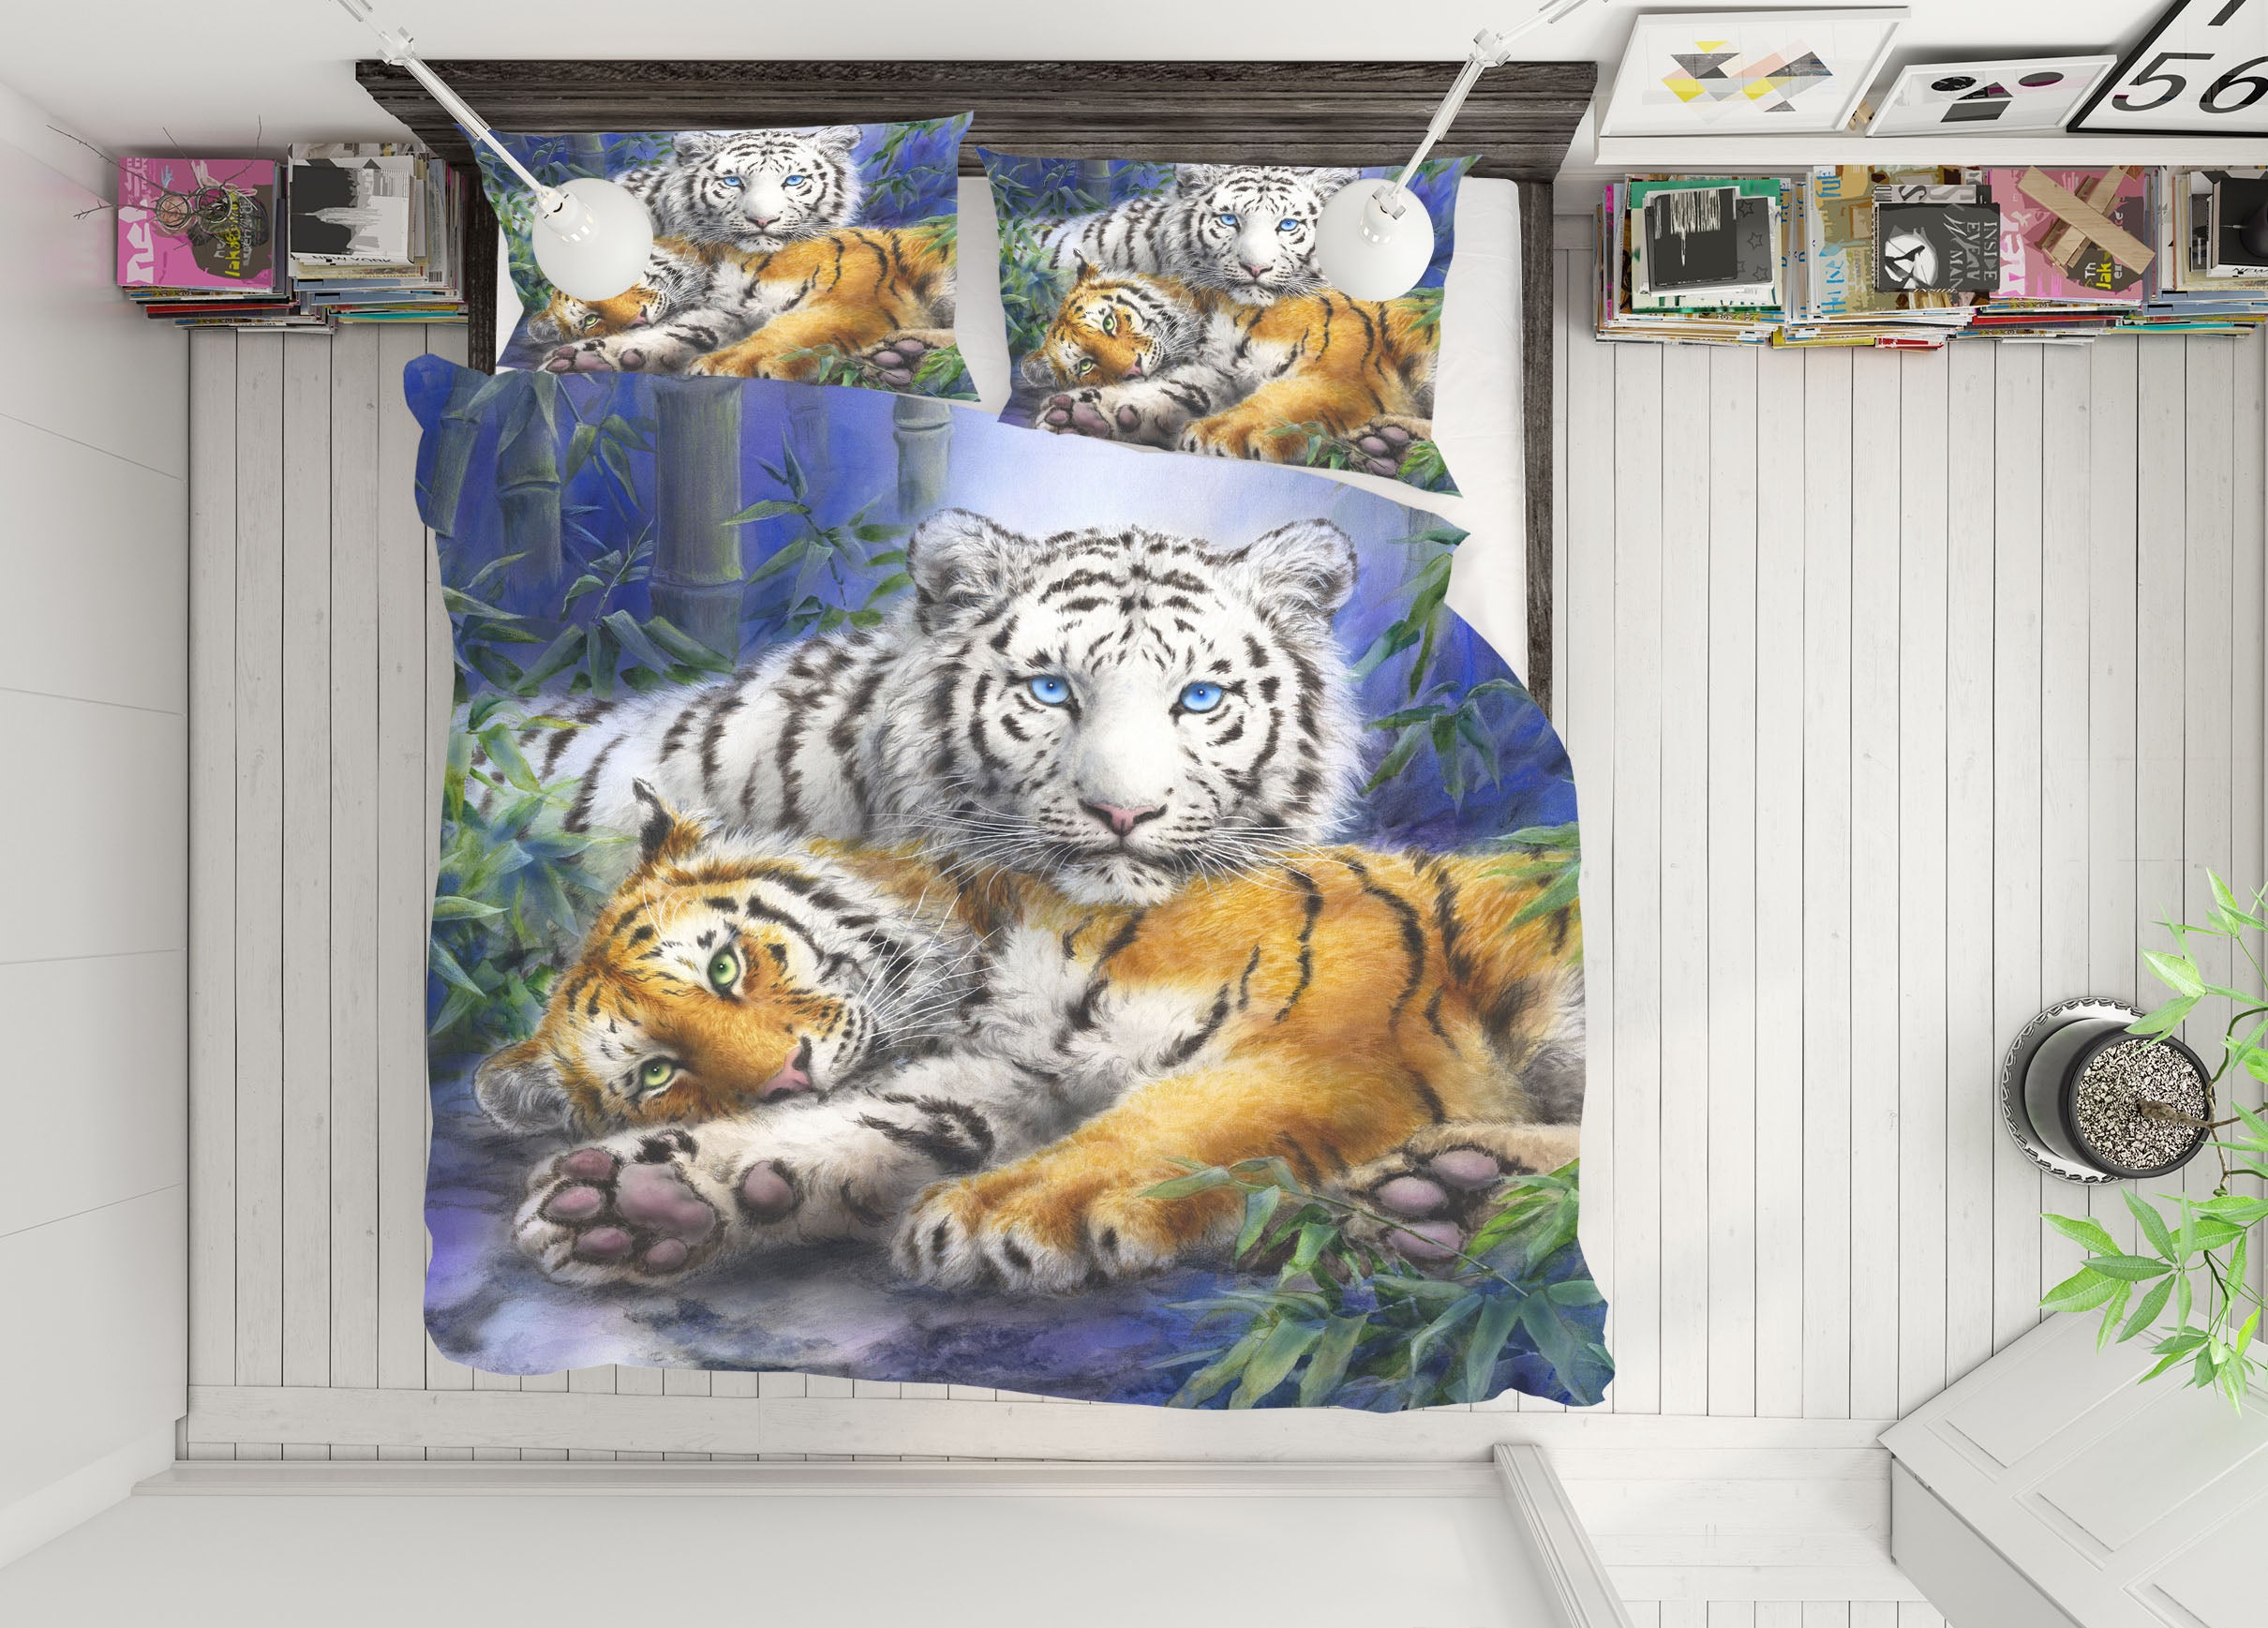 3D Bamboo Tiger 4215 Kayomi Harai Bedding Bed Pillowcases Quilt Cover Duvet Cover